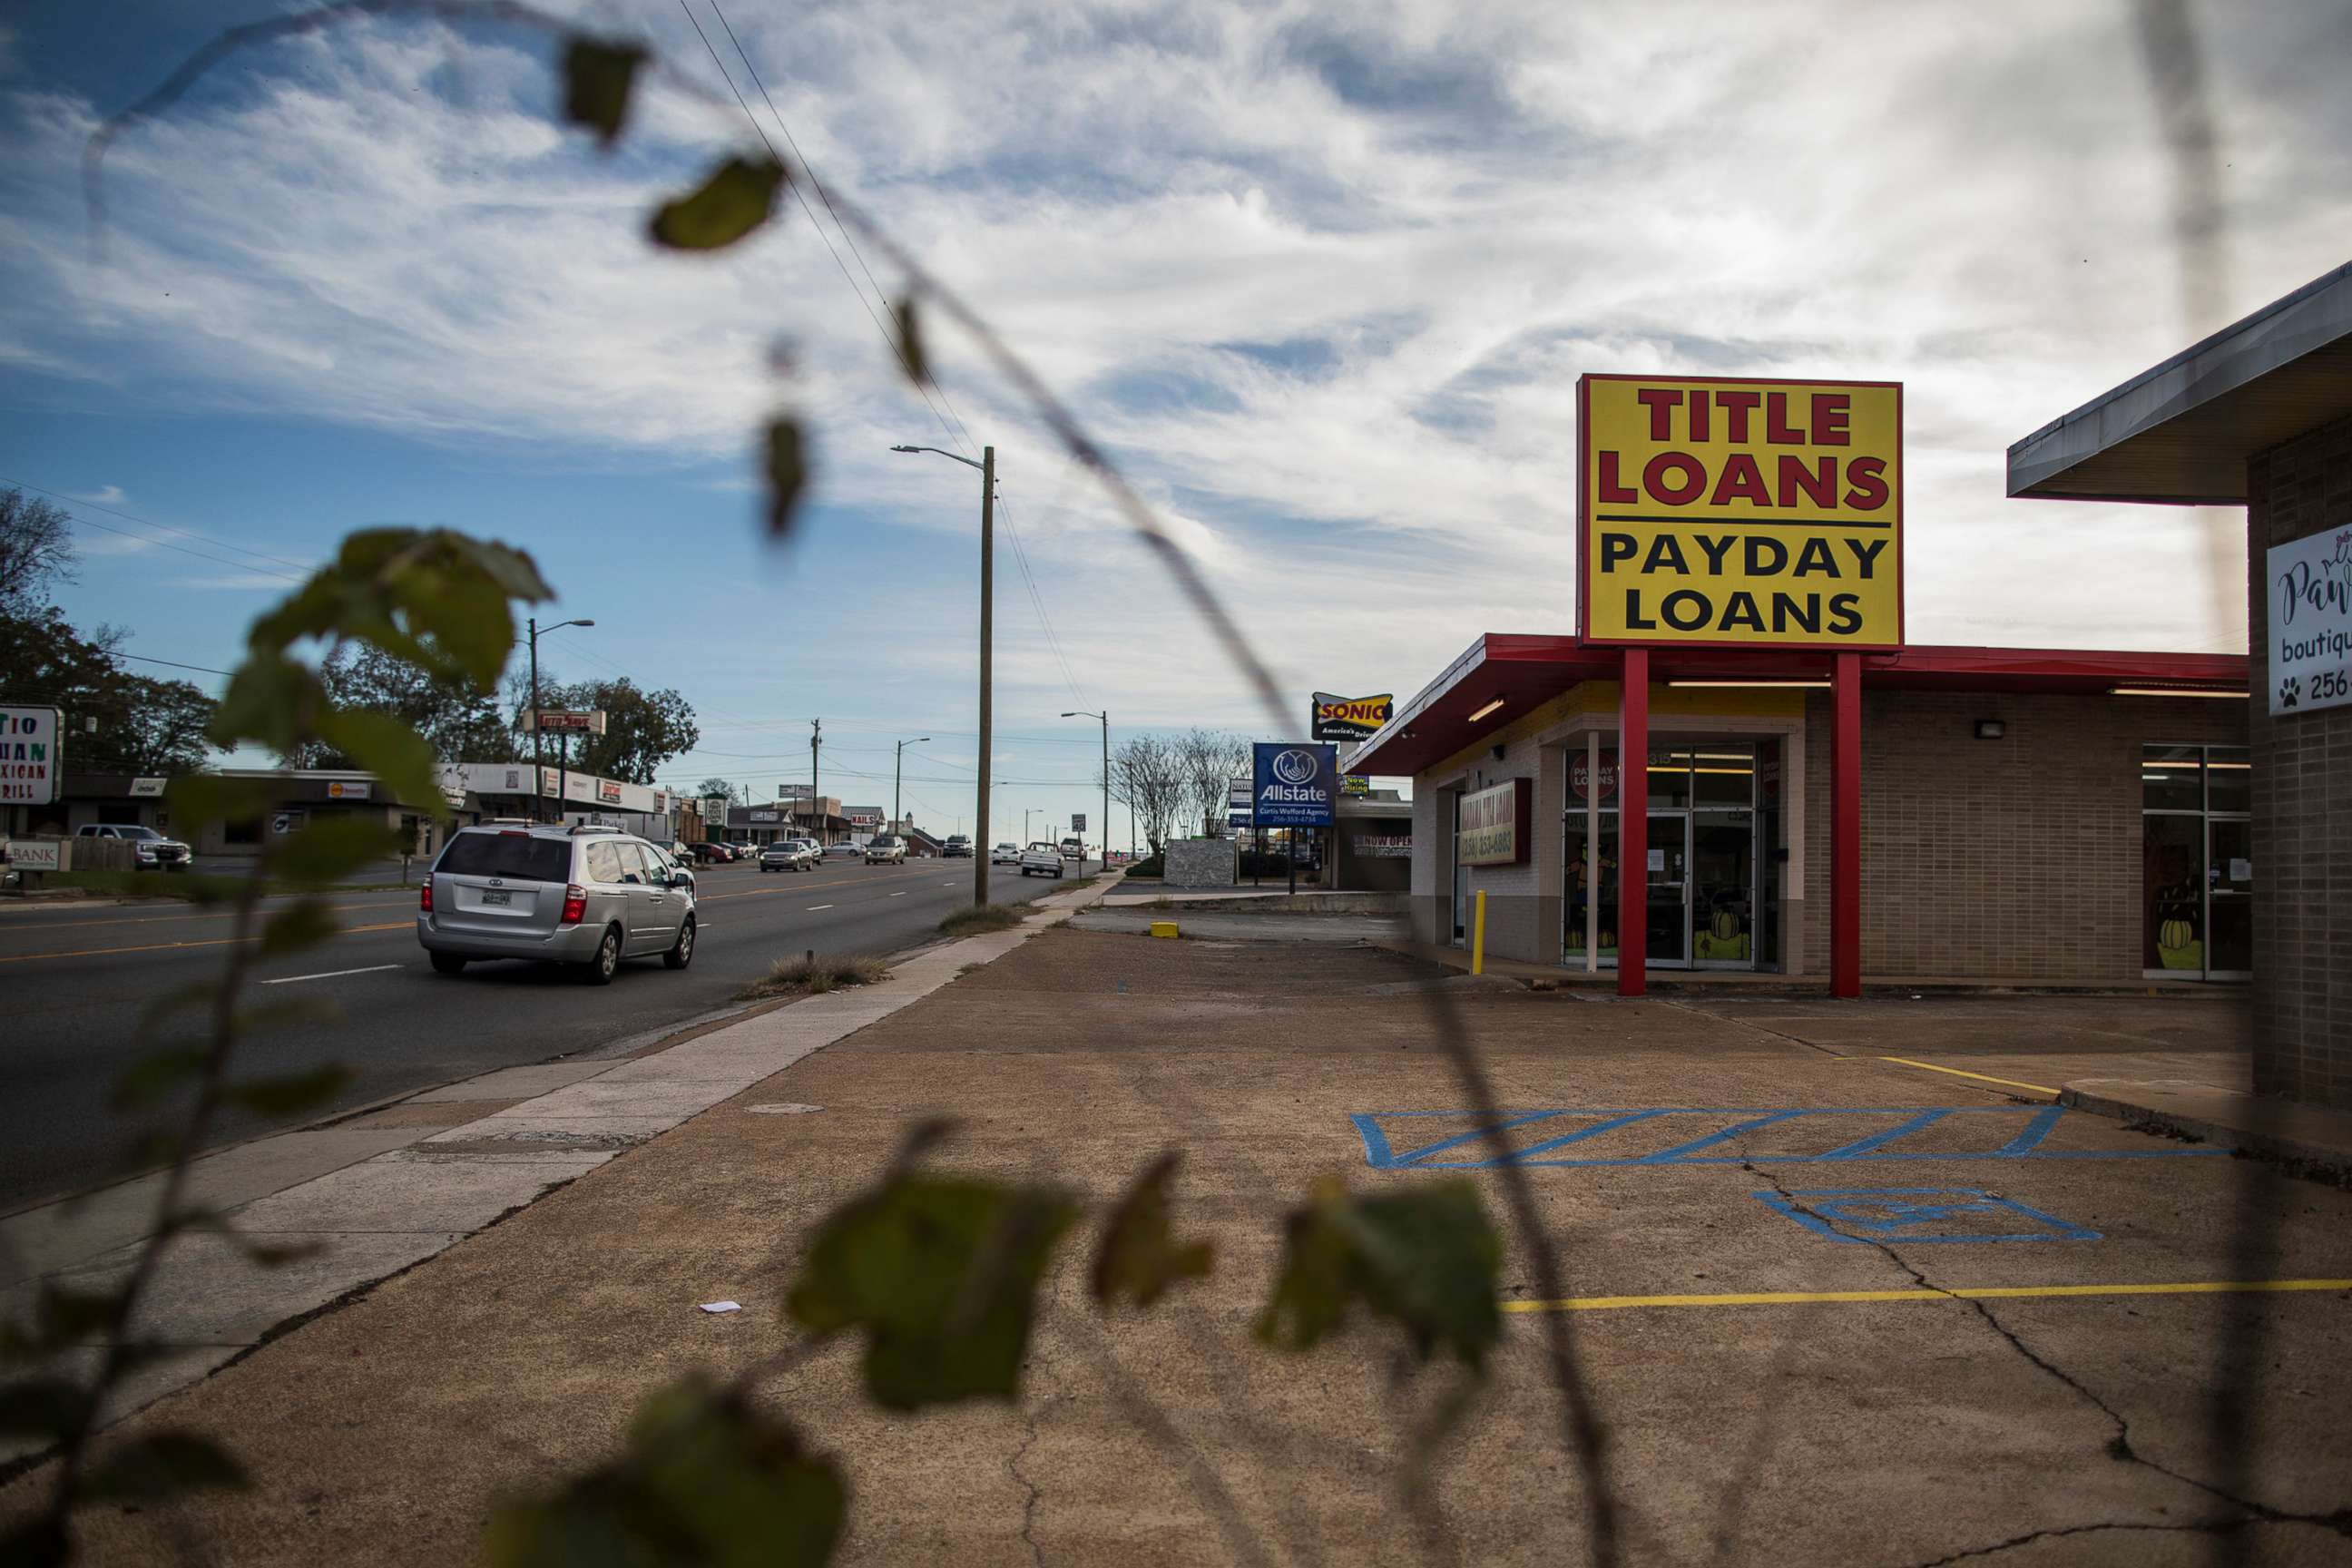 PHOTO: In this Nov. 21, 2017, file photo, a payday loans business is shown in Decatur, Ala.